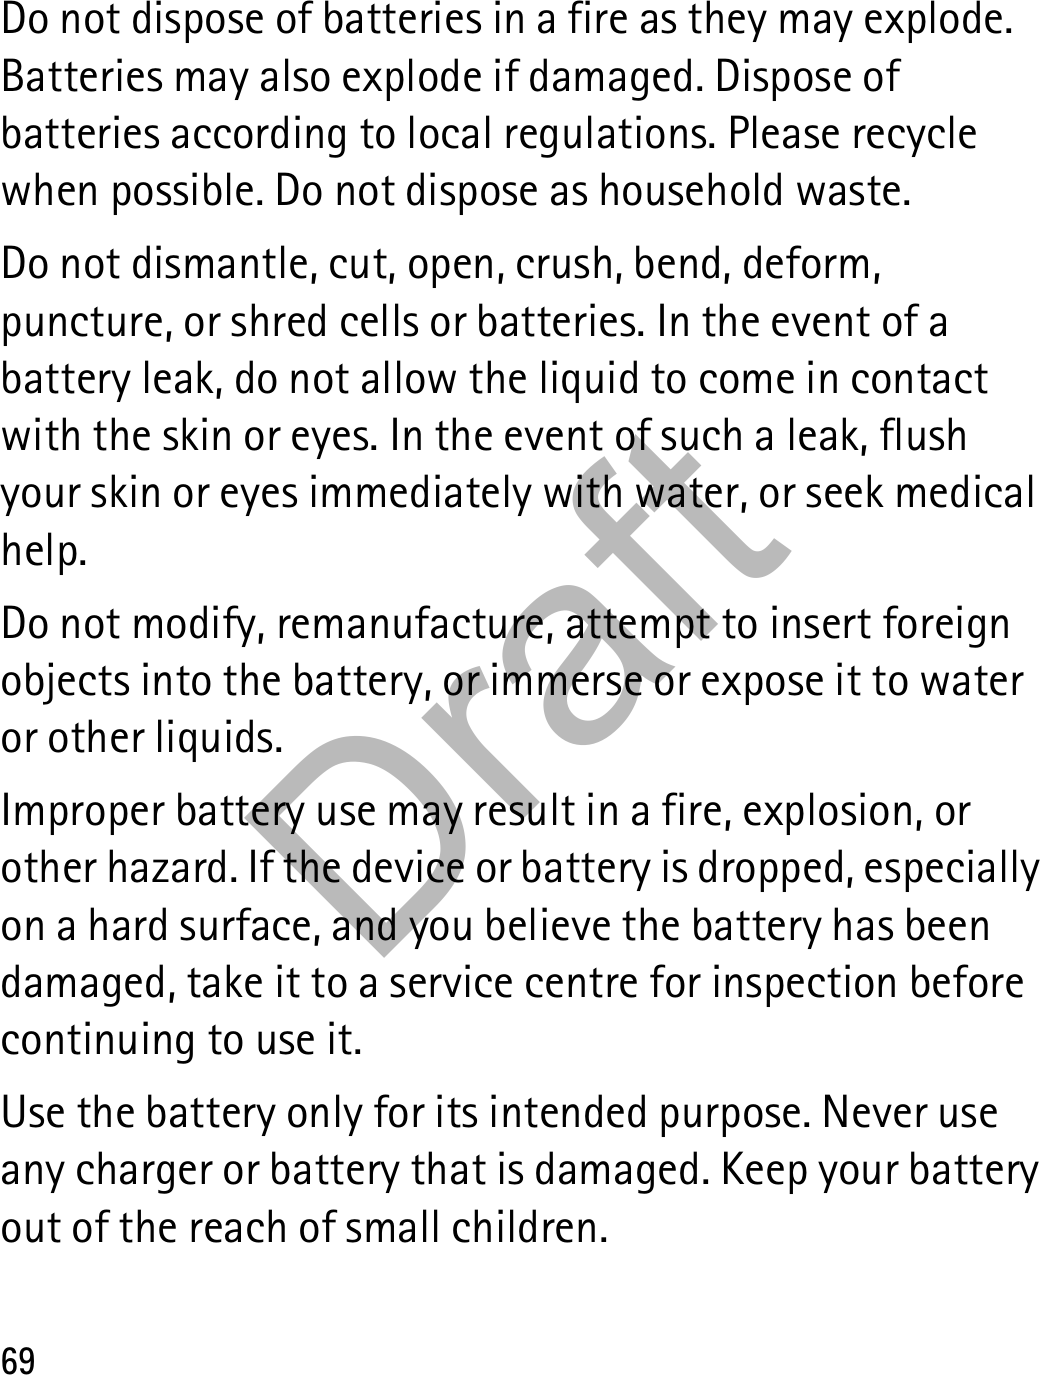 69Do not dispose of batteries in a fire as they may explode. Batteries may also explode if damaged. Dispose of batteries according to local regulations. Please recycle when possible. Do not dispose as household waste.Do not dismantle, cut, open, crush, bend, deform, puncture, or shred cells or batteries. In the event of a battery leak, do not allow the liquid to come in contact with the skin or eyes. In the event of such a leak, flush your skin or eyes immediately with water, or seek medical help.Do not modify, remanufacture, attempt to insert foreign objects into the battery, or immerse or expose it to water or other liquids.Improper battery use may result in a fire, explosion, or other hazard. If the device or battery is dropped, especially on a hard surface, and you believe the battery has been damaged, take it to a service centre for inspection before continuing to use it.Use the battery only for its intended purpose. Never use any charger or battery that is damaged. Keep your battery out of the reach of small children.Draft